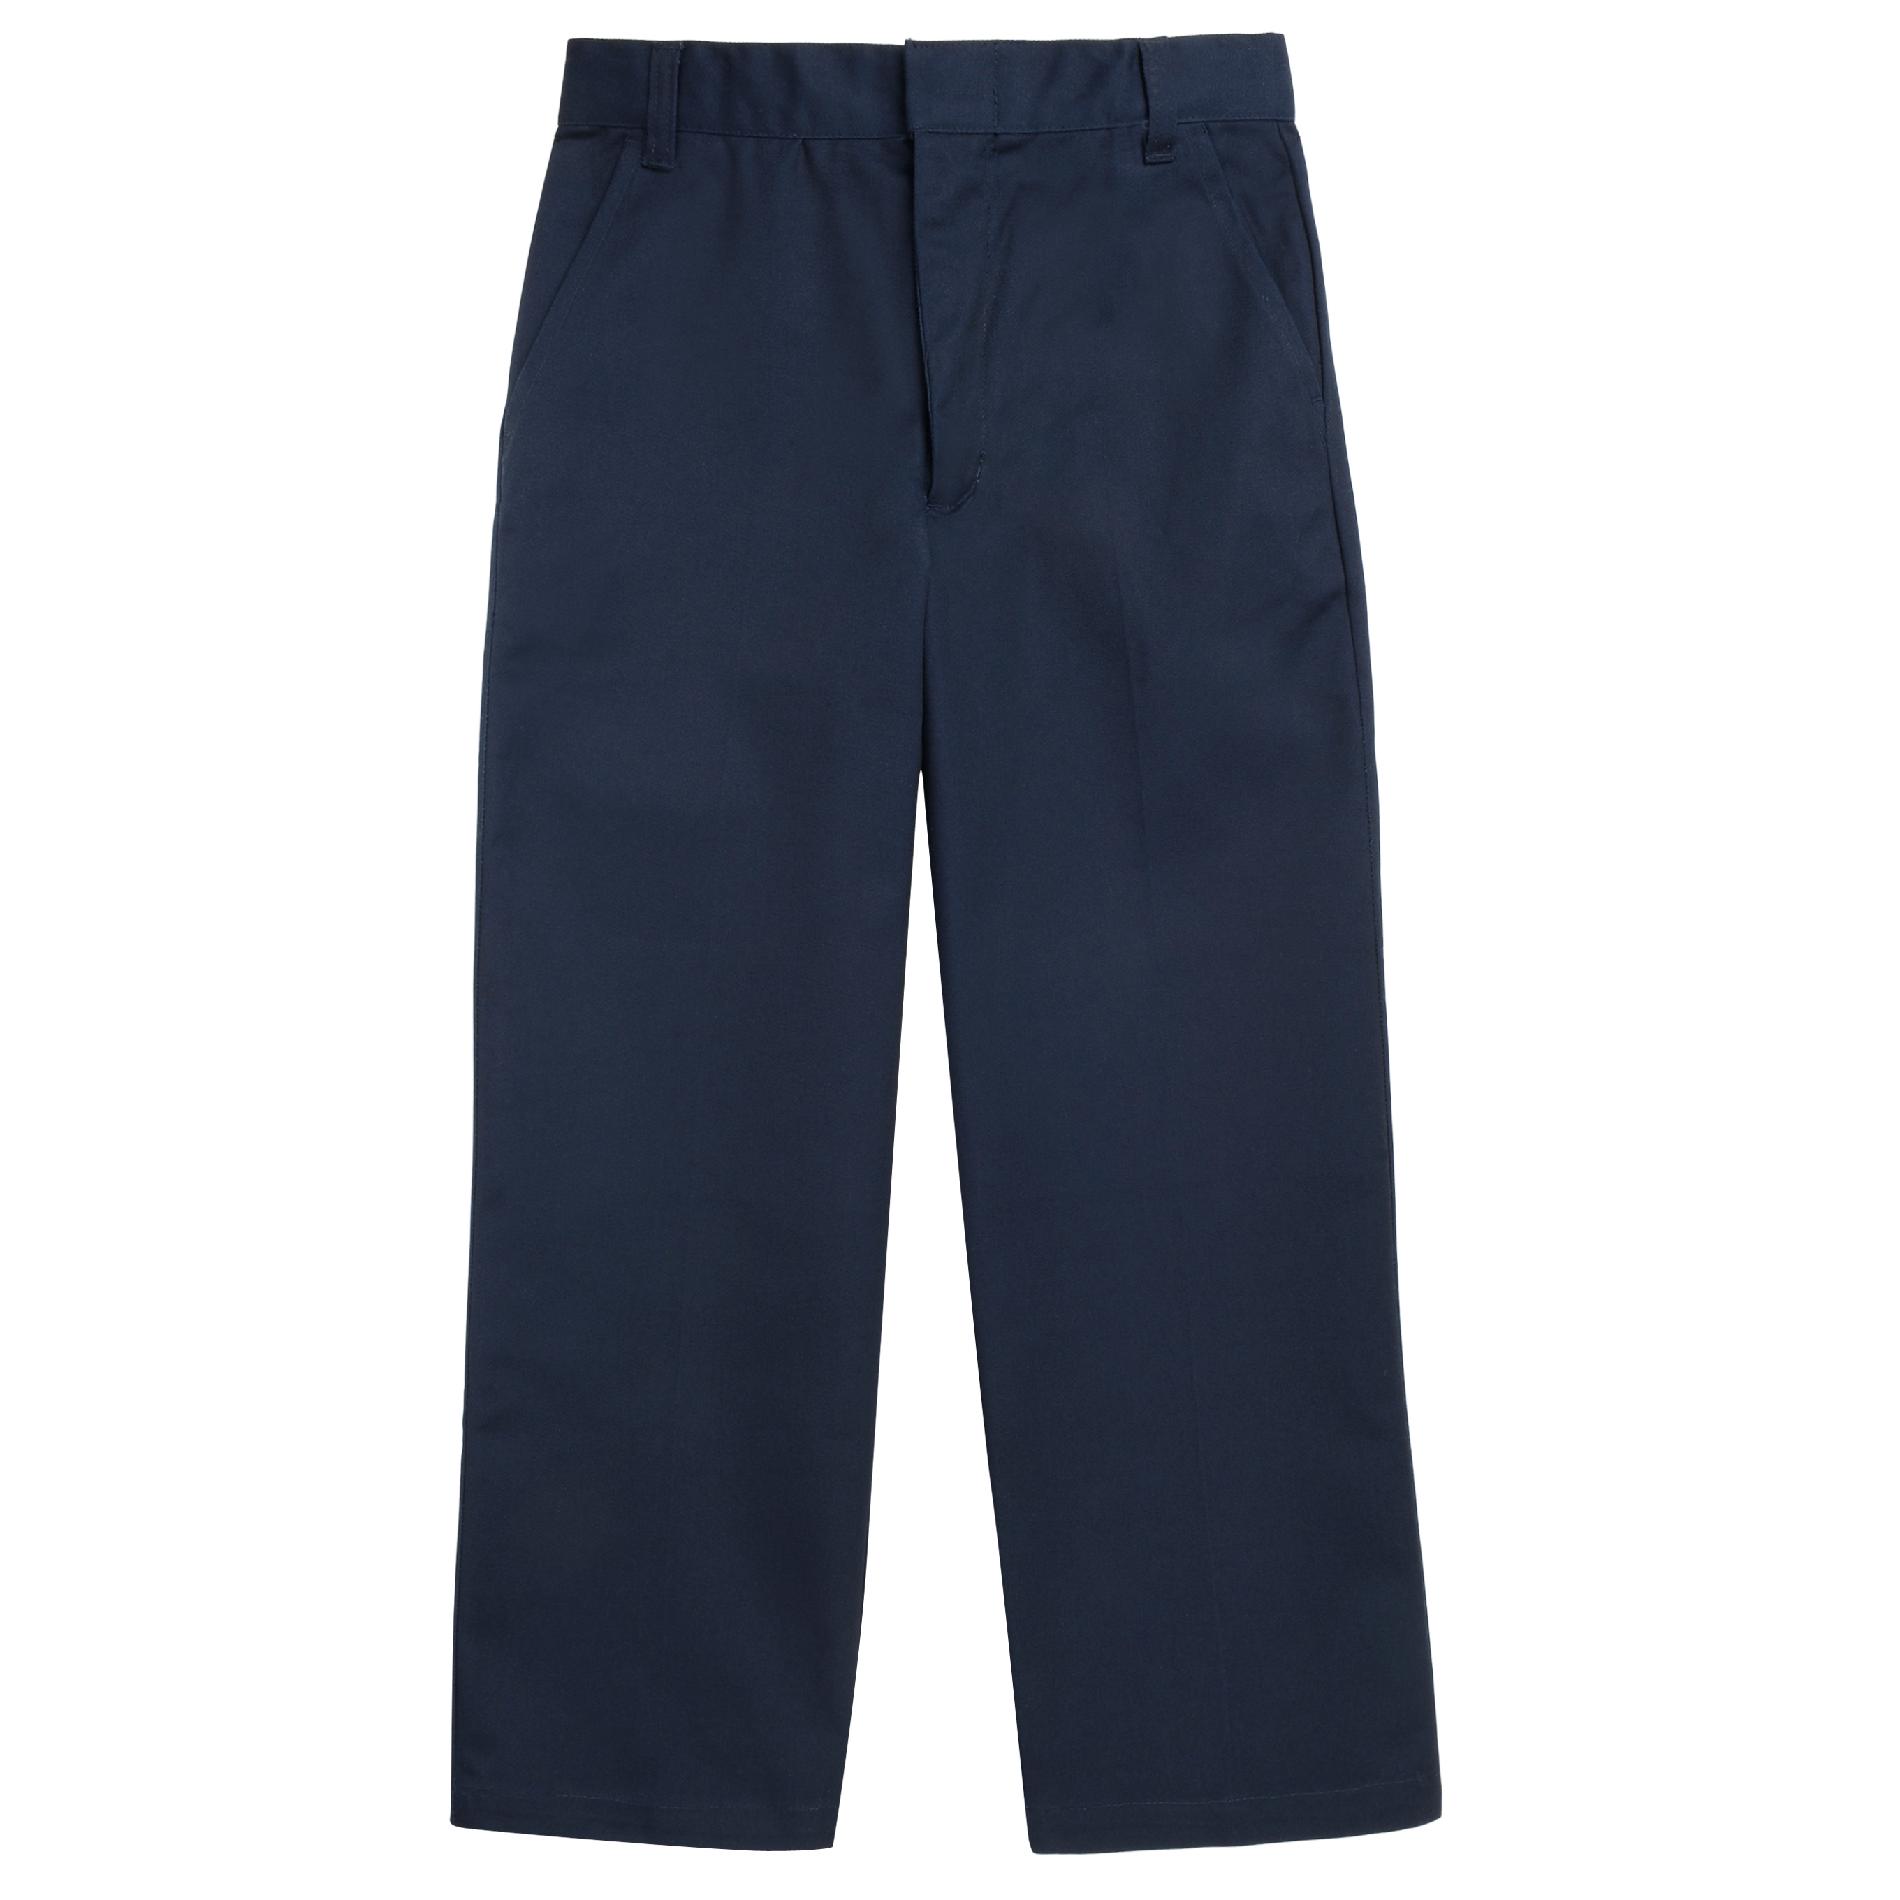 At School by French Toast Young Men's Twill Pant